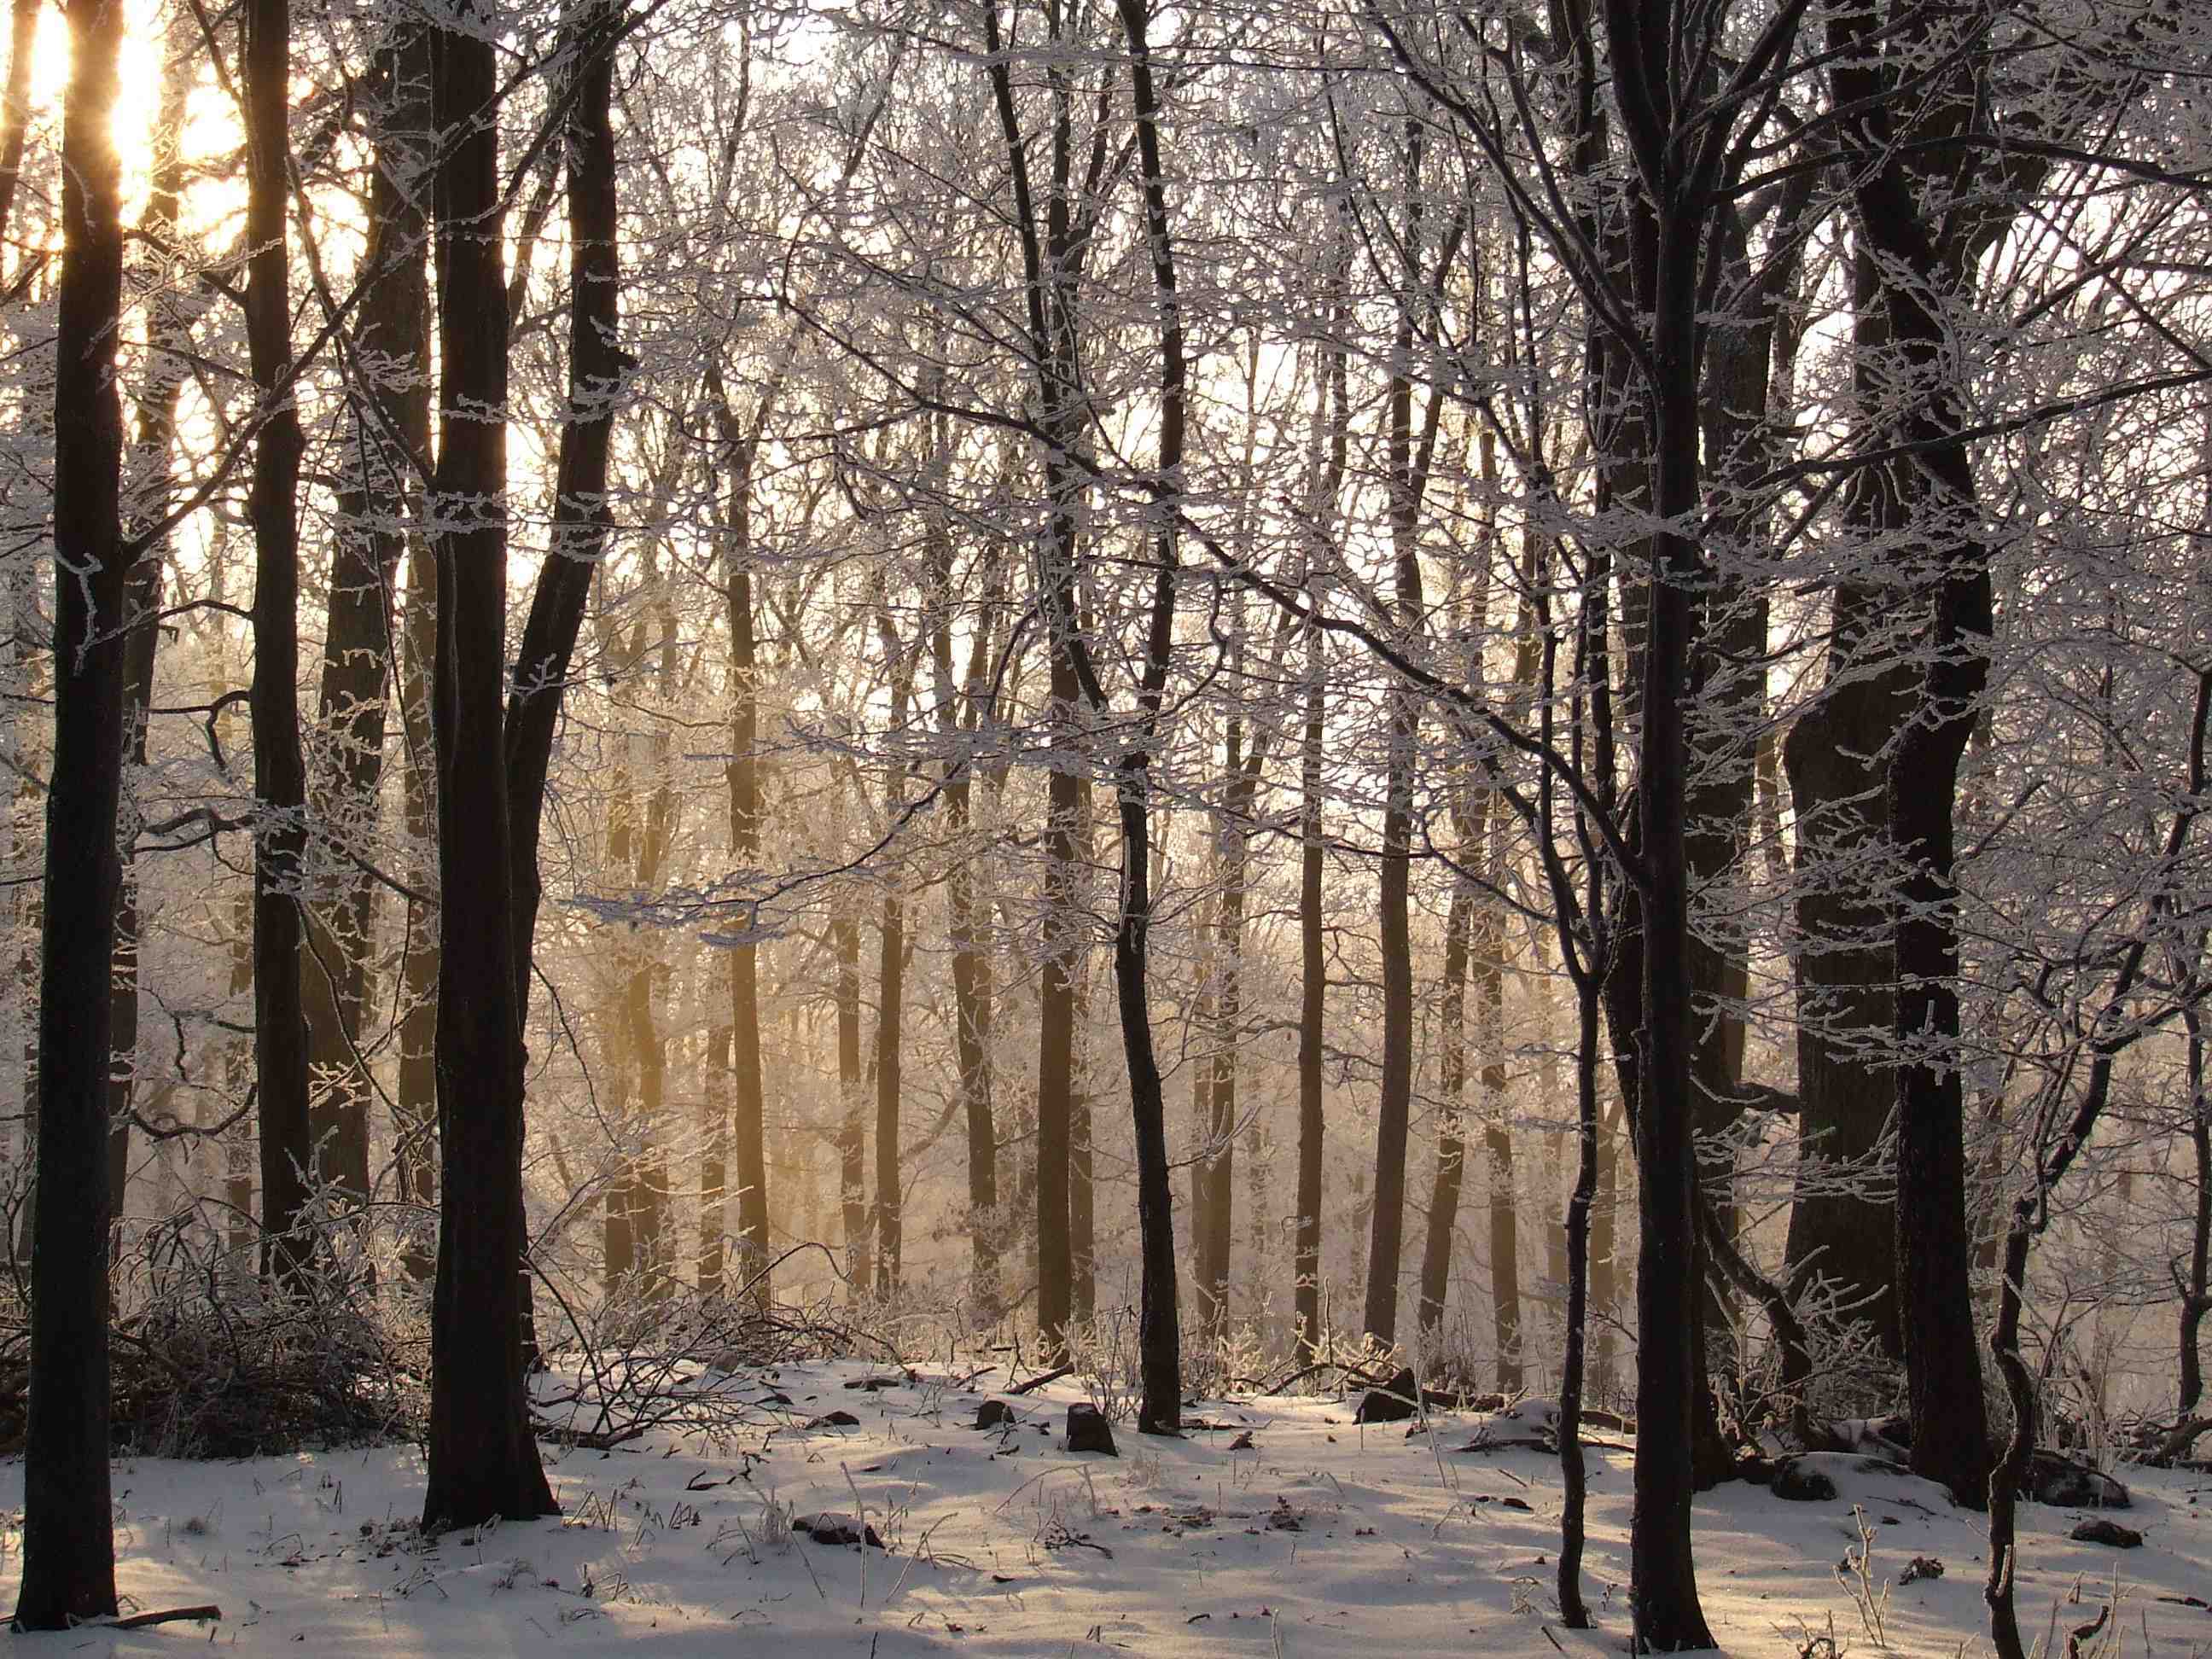 Image of a gorgeous beech forest with snow on the ground.